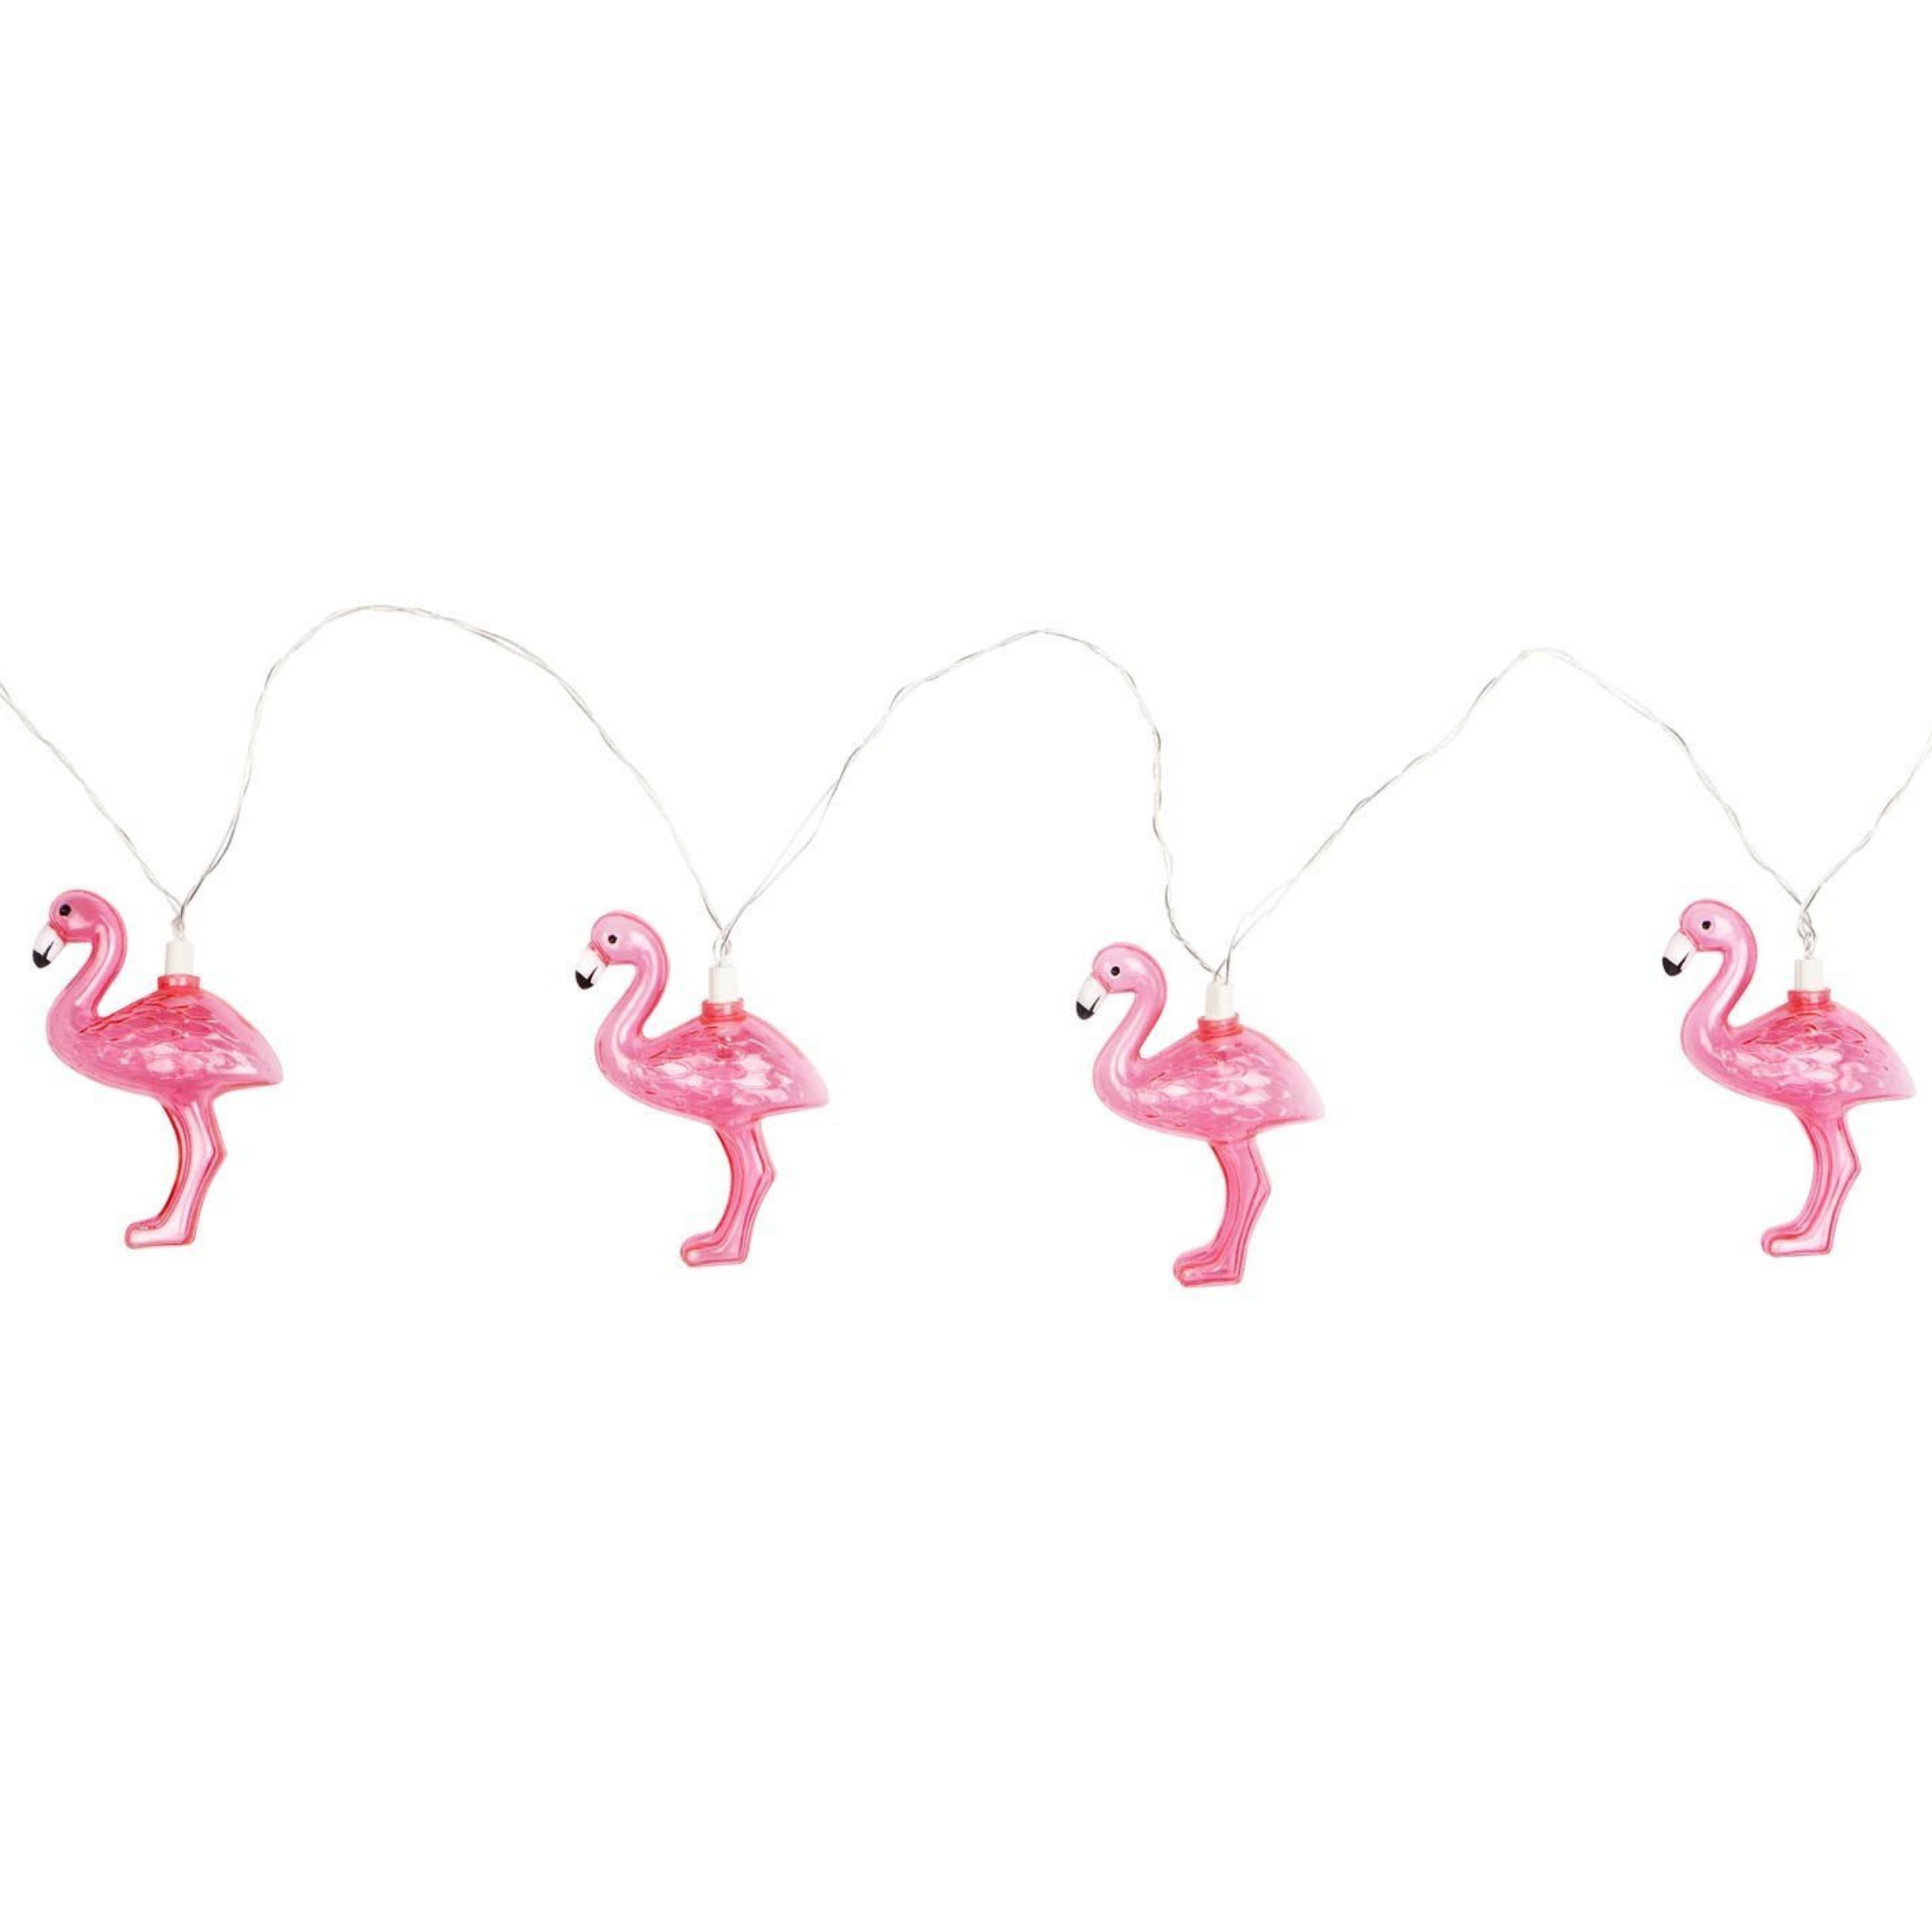 String lights that are shaped like pink standing flamingos, strung together by white string. These light are pictured on a white background.